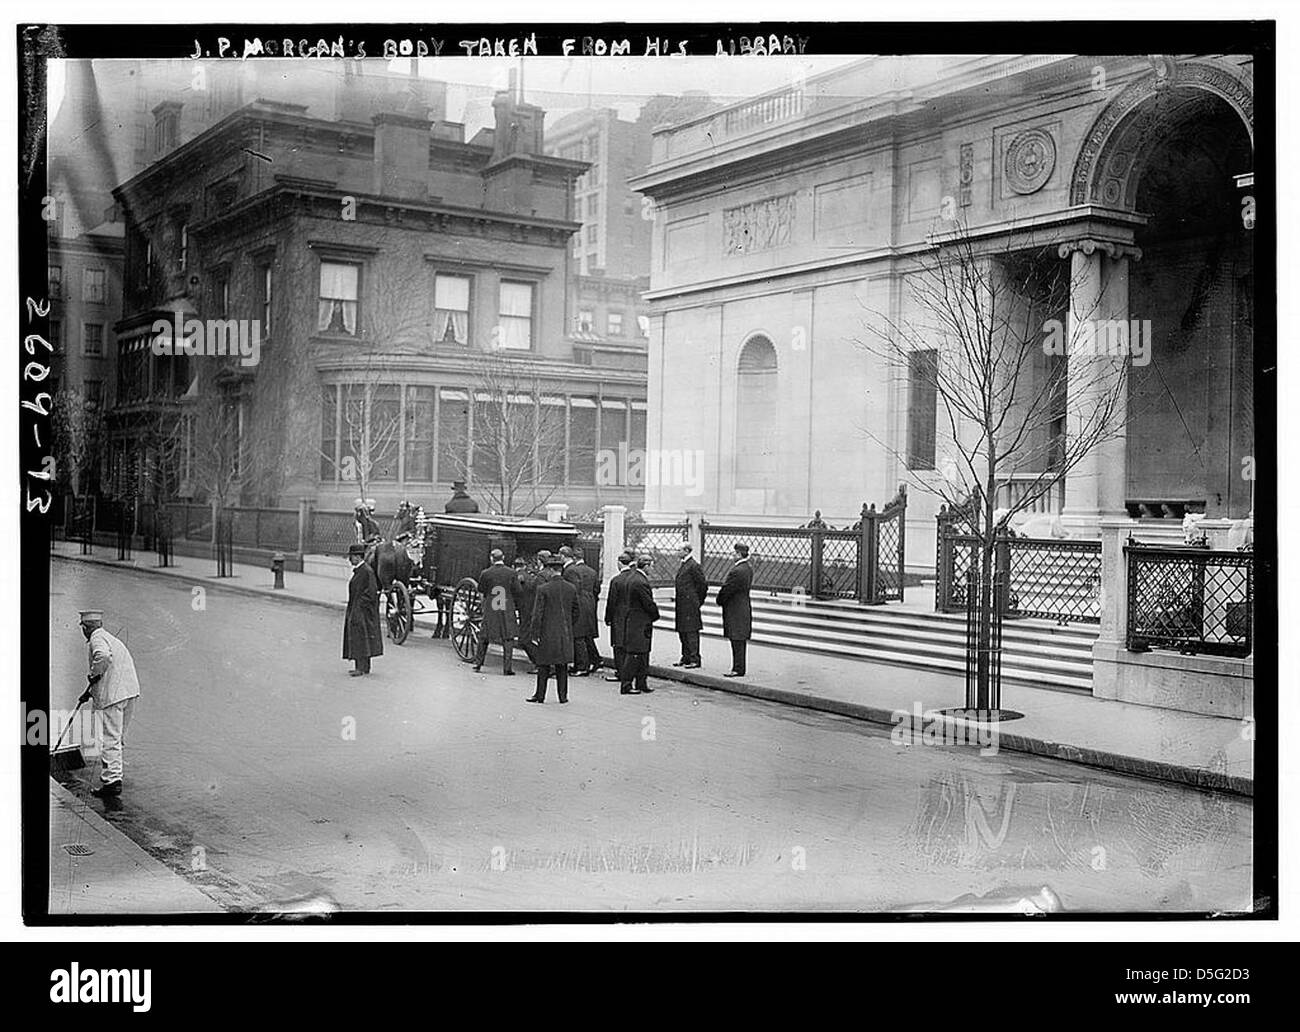 J.P. Morgan's body taken from his library (LOC) Stock Photo